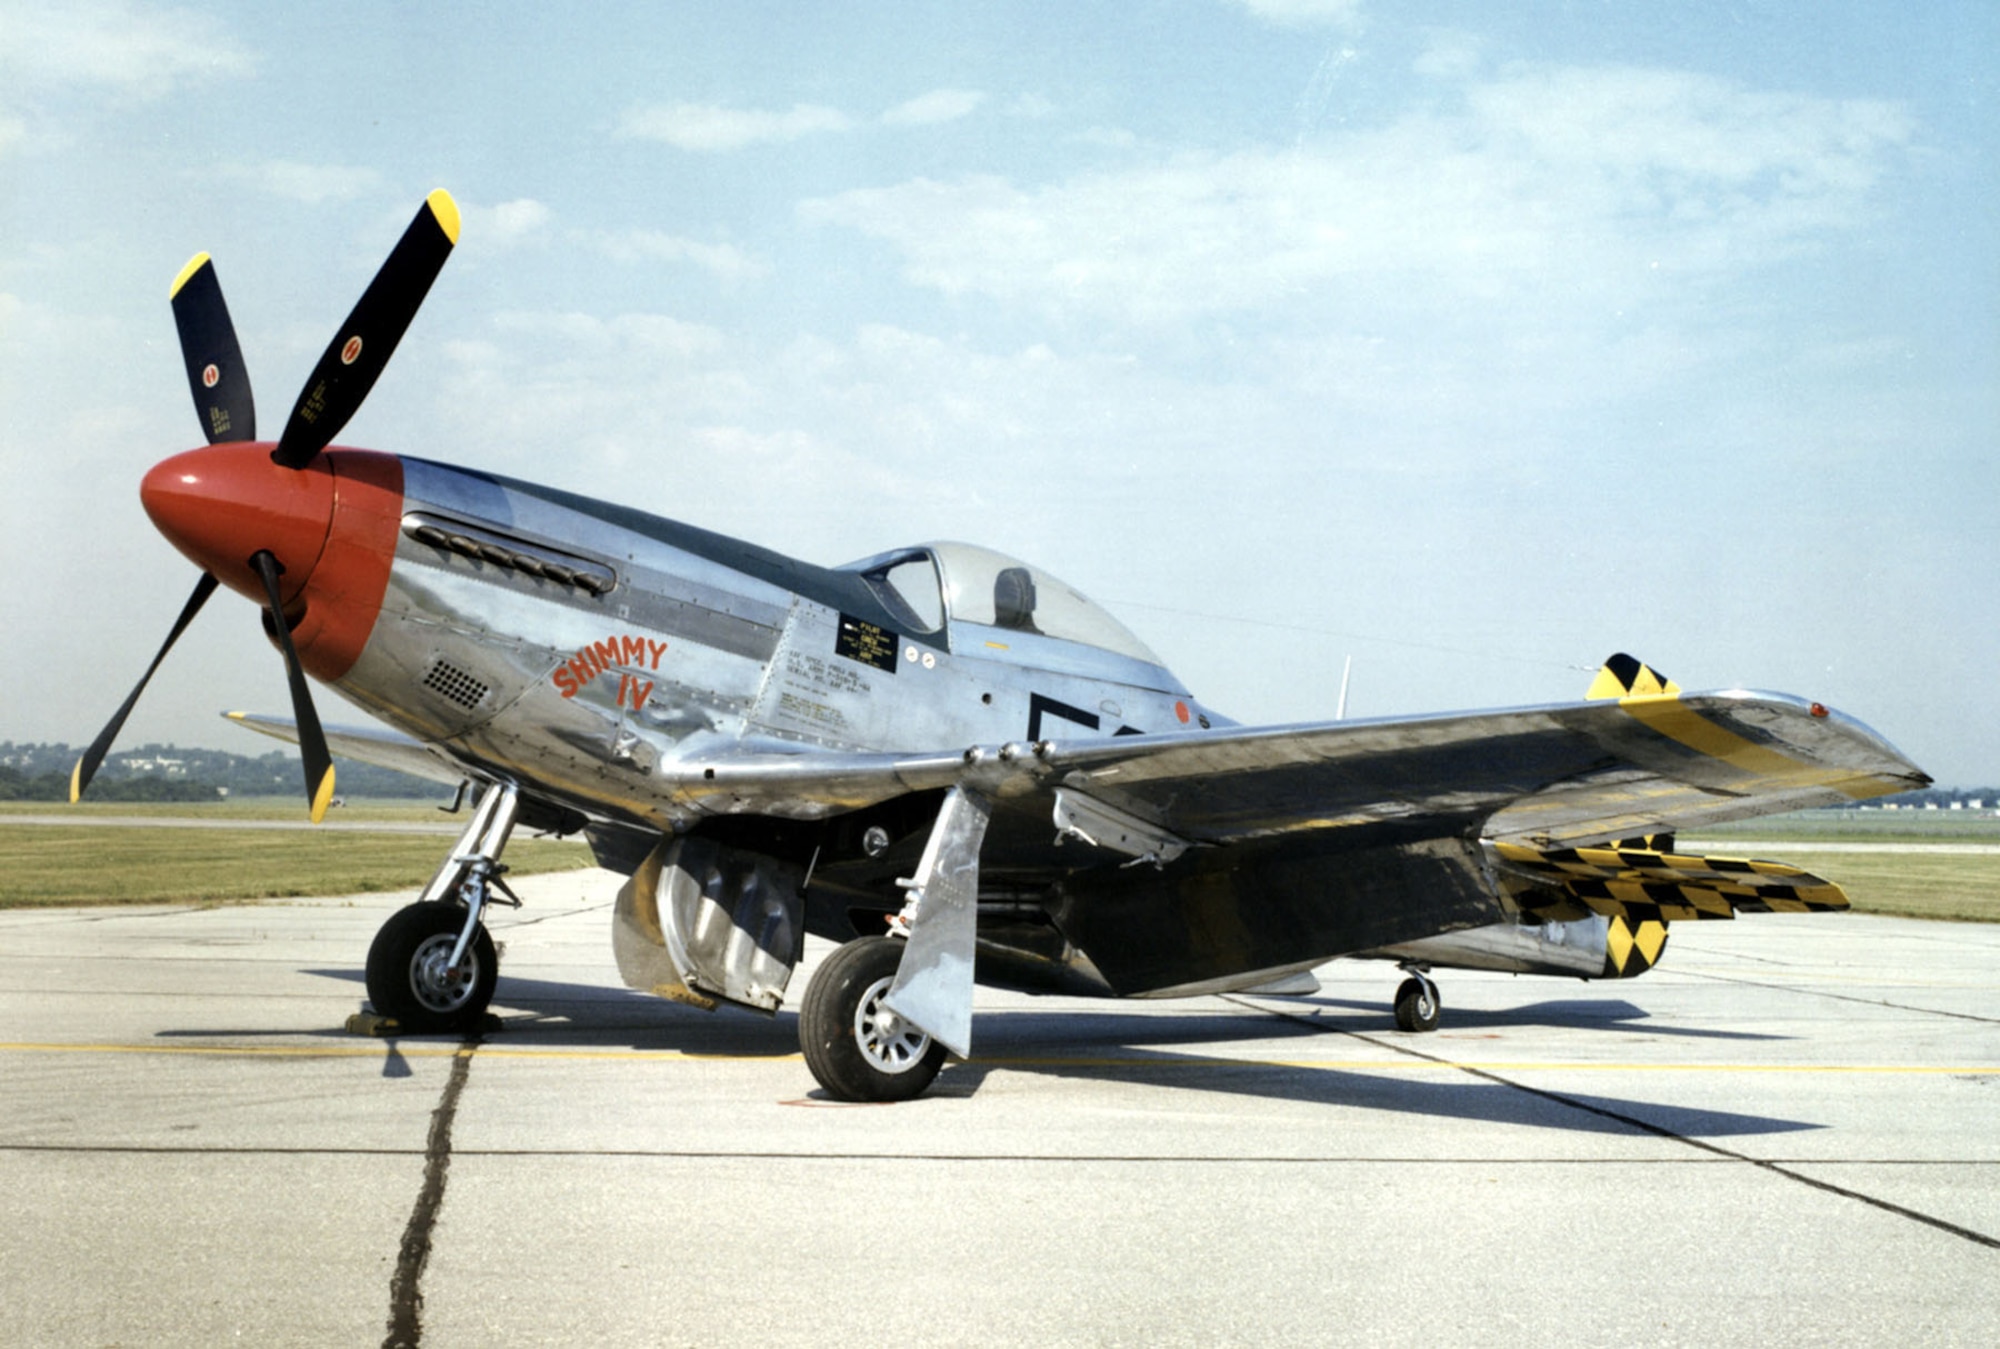 DAYTON, Ohio -- North American P-51D Mustang at the National Museum of the United States Air Force. (U.S. Air Force photo)